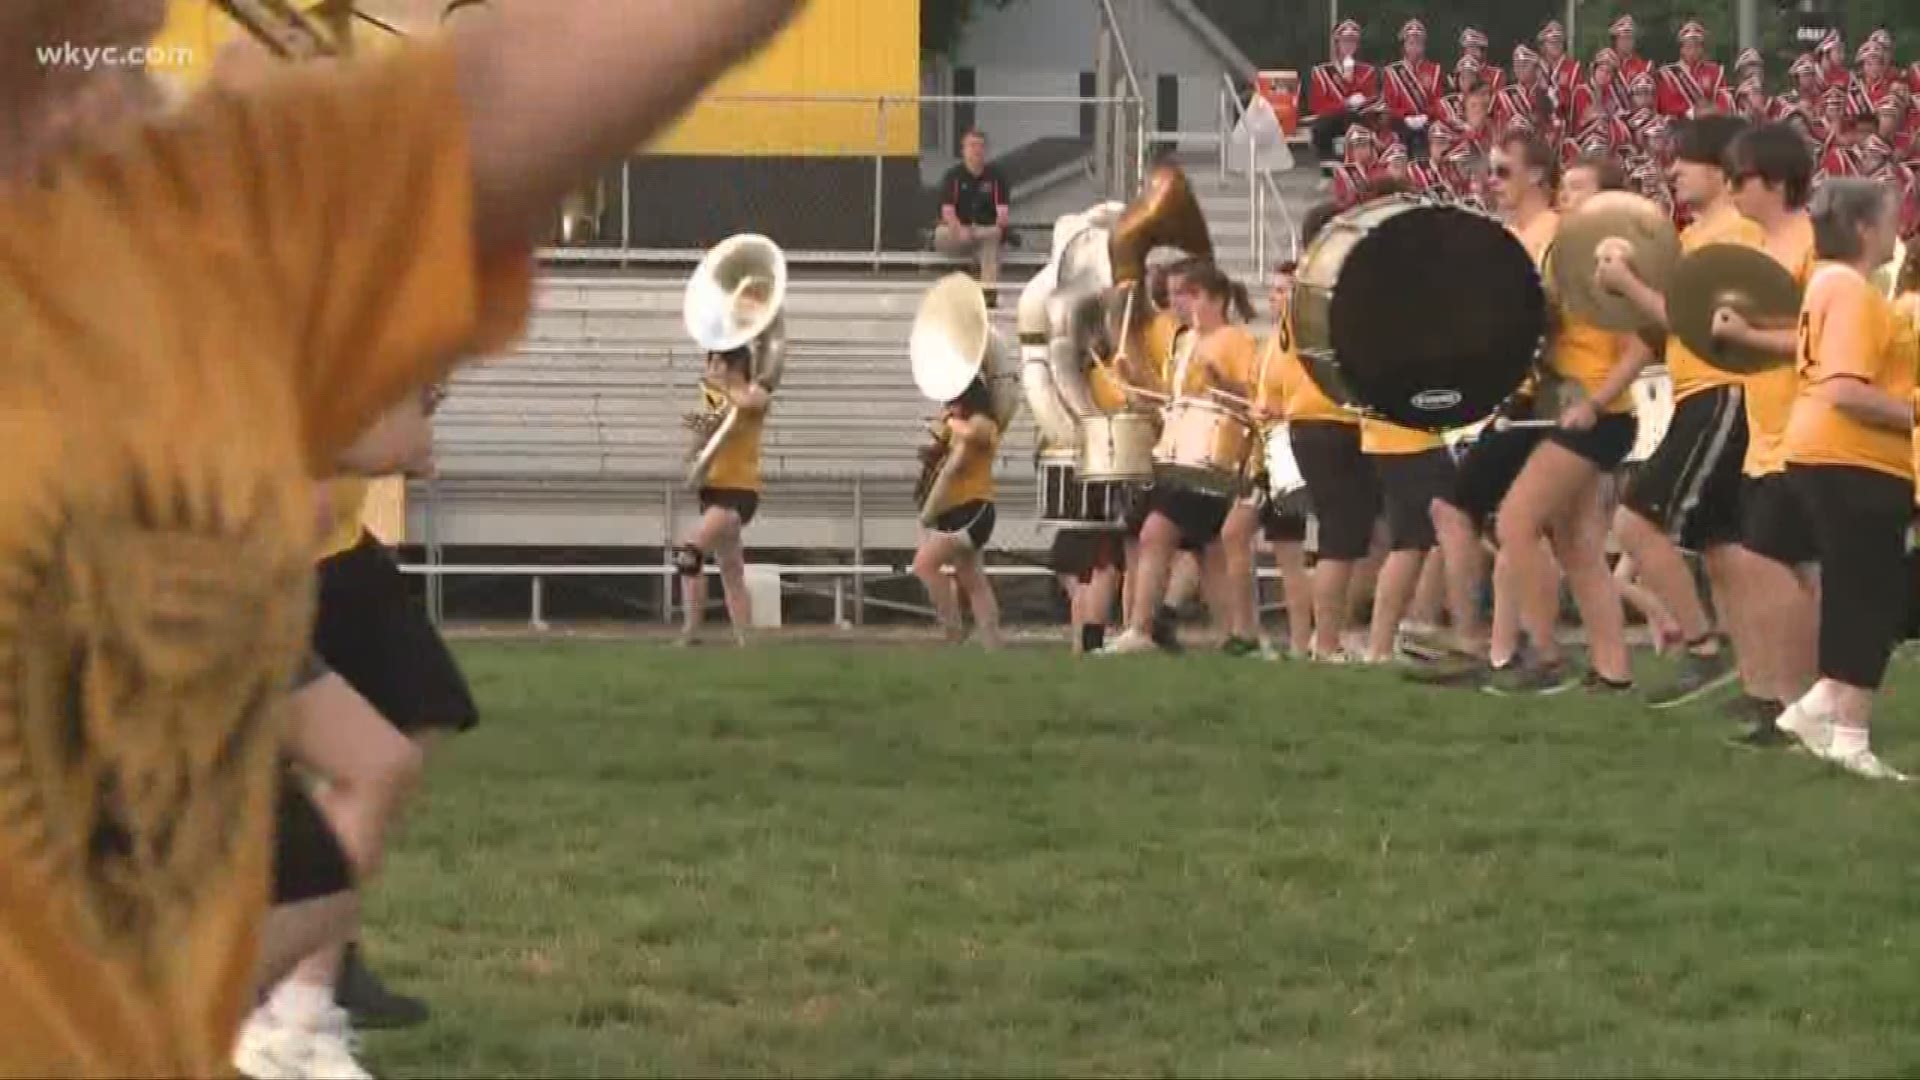 More than 250 former band members of the Cuyahoga Falls Marching Band came together to mark a milestone. Dressed in gold shirts, the Pride Alumni Band celebrated its 50th anniversary during this year's "Preview of Bands" performance at Cuyahoga Falls High School's Clifford Stadium.